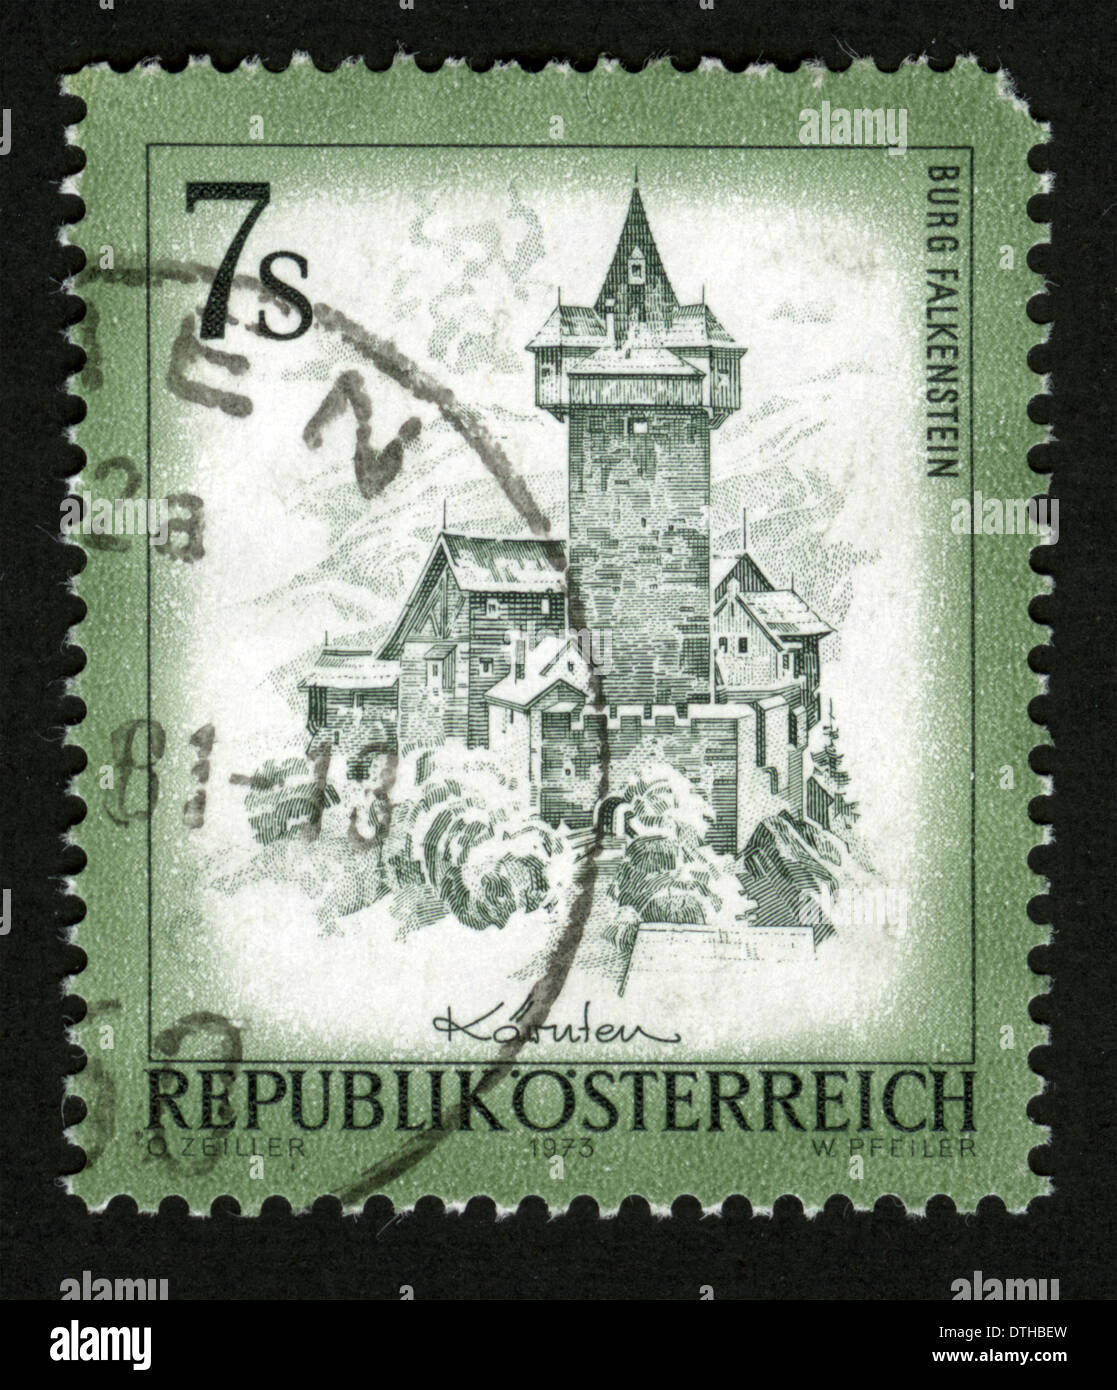 Republic of Austria Postage Stamp close up in black background Burg Falkenstein is a castle near Obervellach in Carinthia, Austr Stock Photo